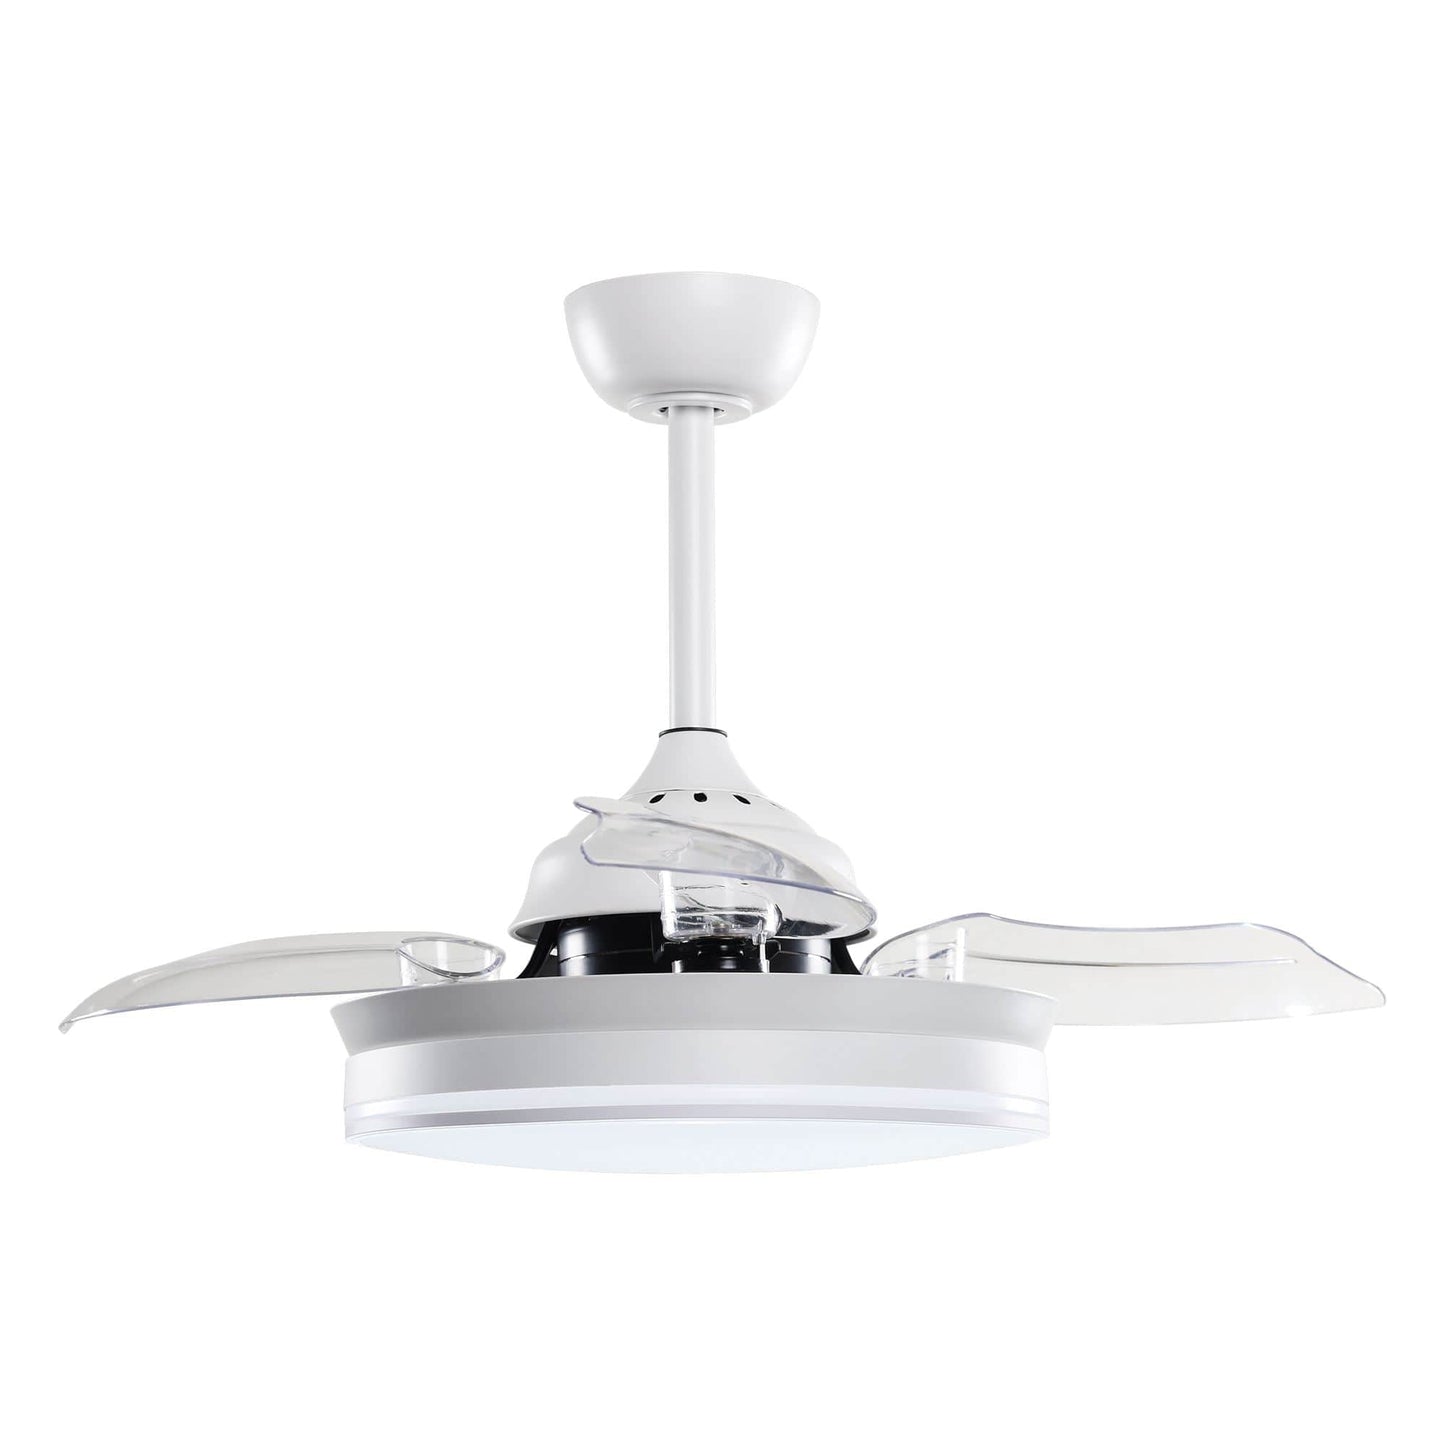 Parrot Uncle 36" Ericksen Modern Downrod Mount Retractable Ceiling Fan with LED Lighting and Remote Control